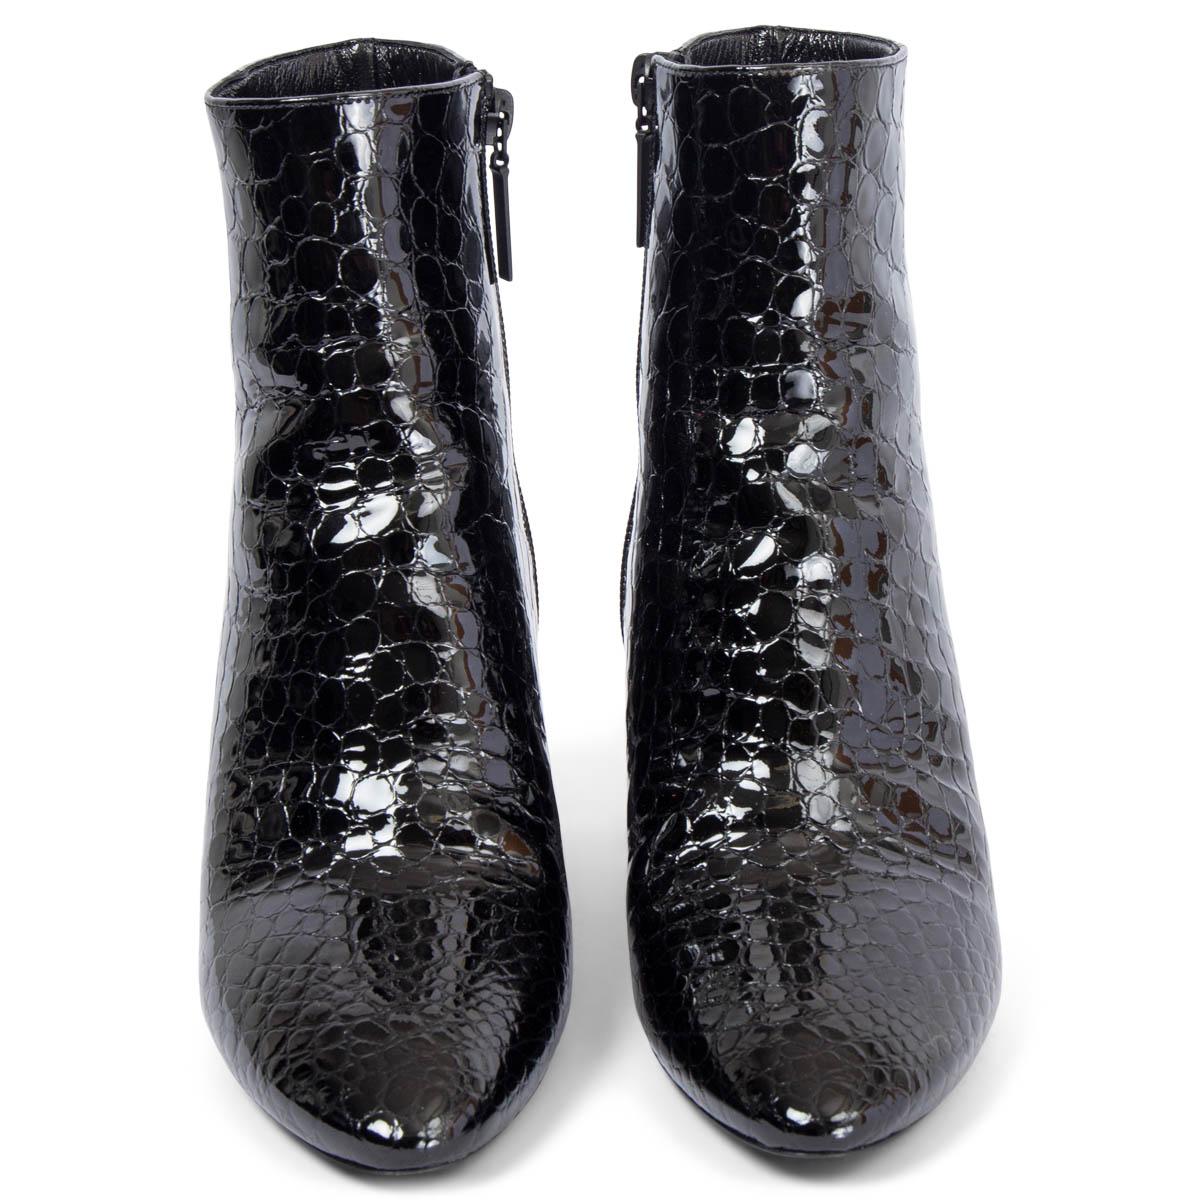 100% authentic Saint Laurent Jane ankle boots in black croco embossed patent leather featuring almond toe and high block heel. Open with a zipper on the inside. Have been worn once and are in excellent condition. 

Measurements
Imprinted